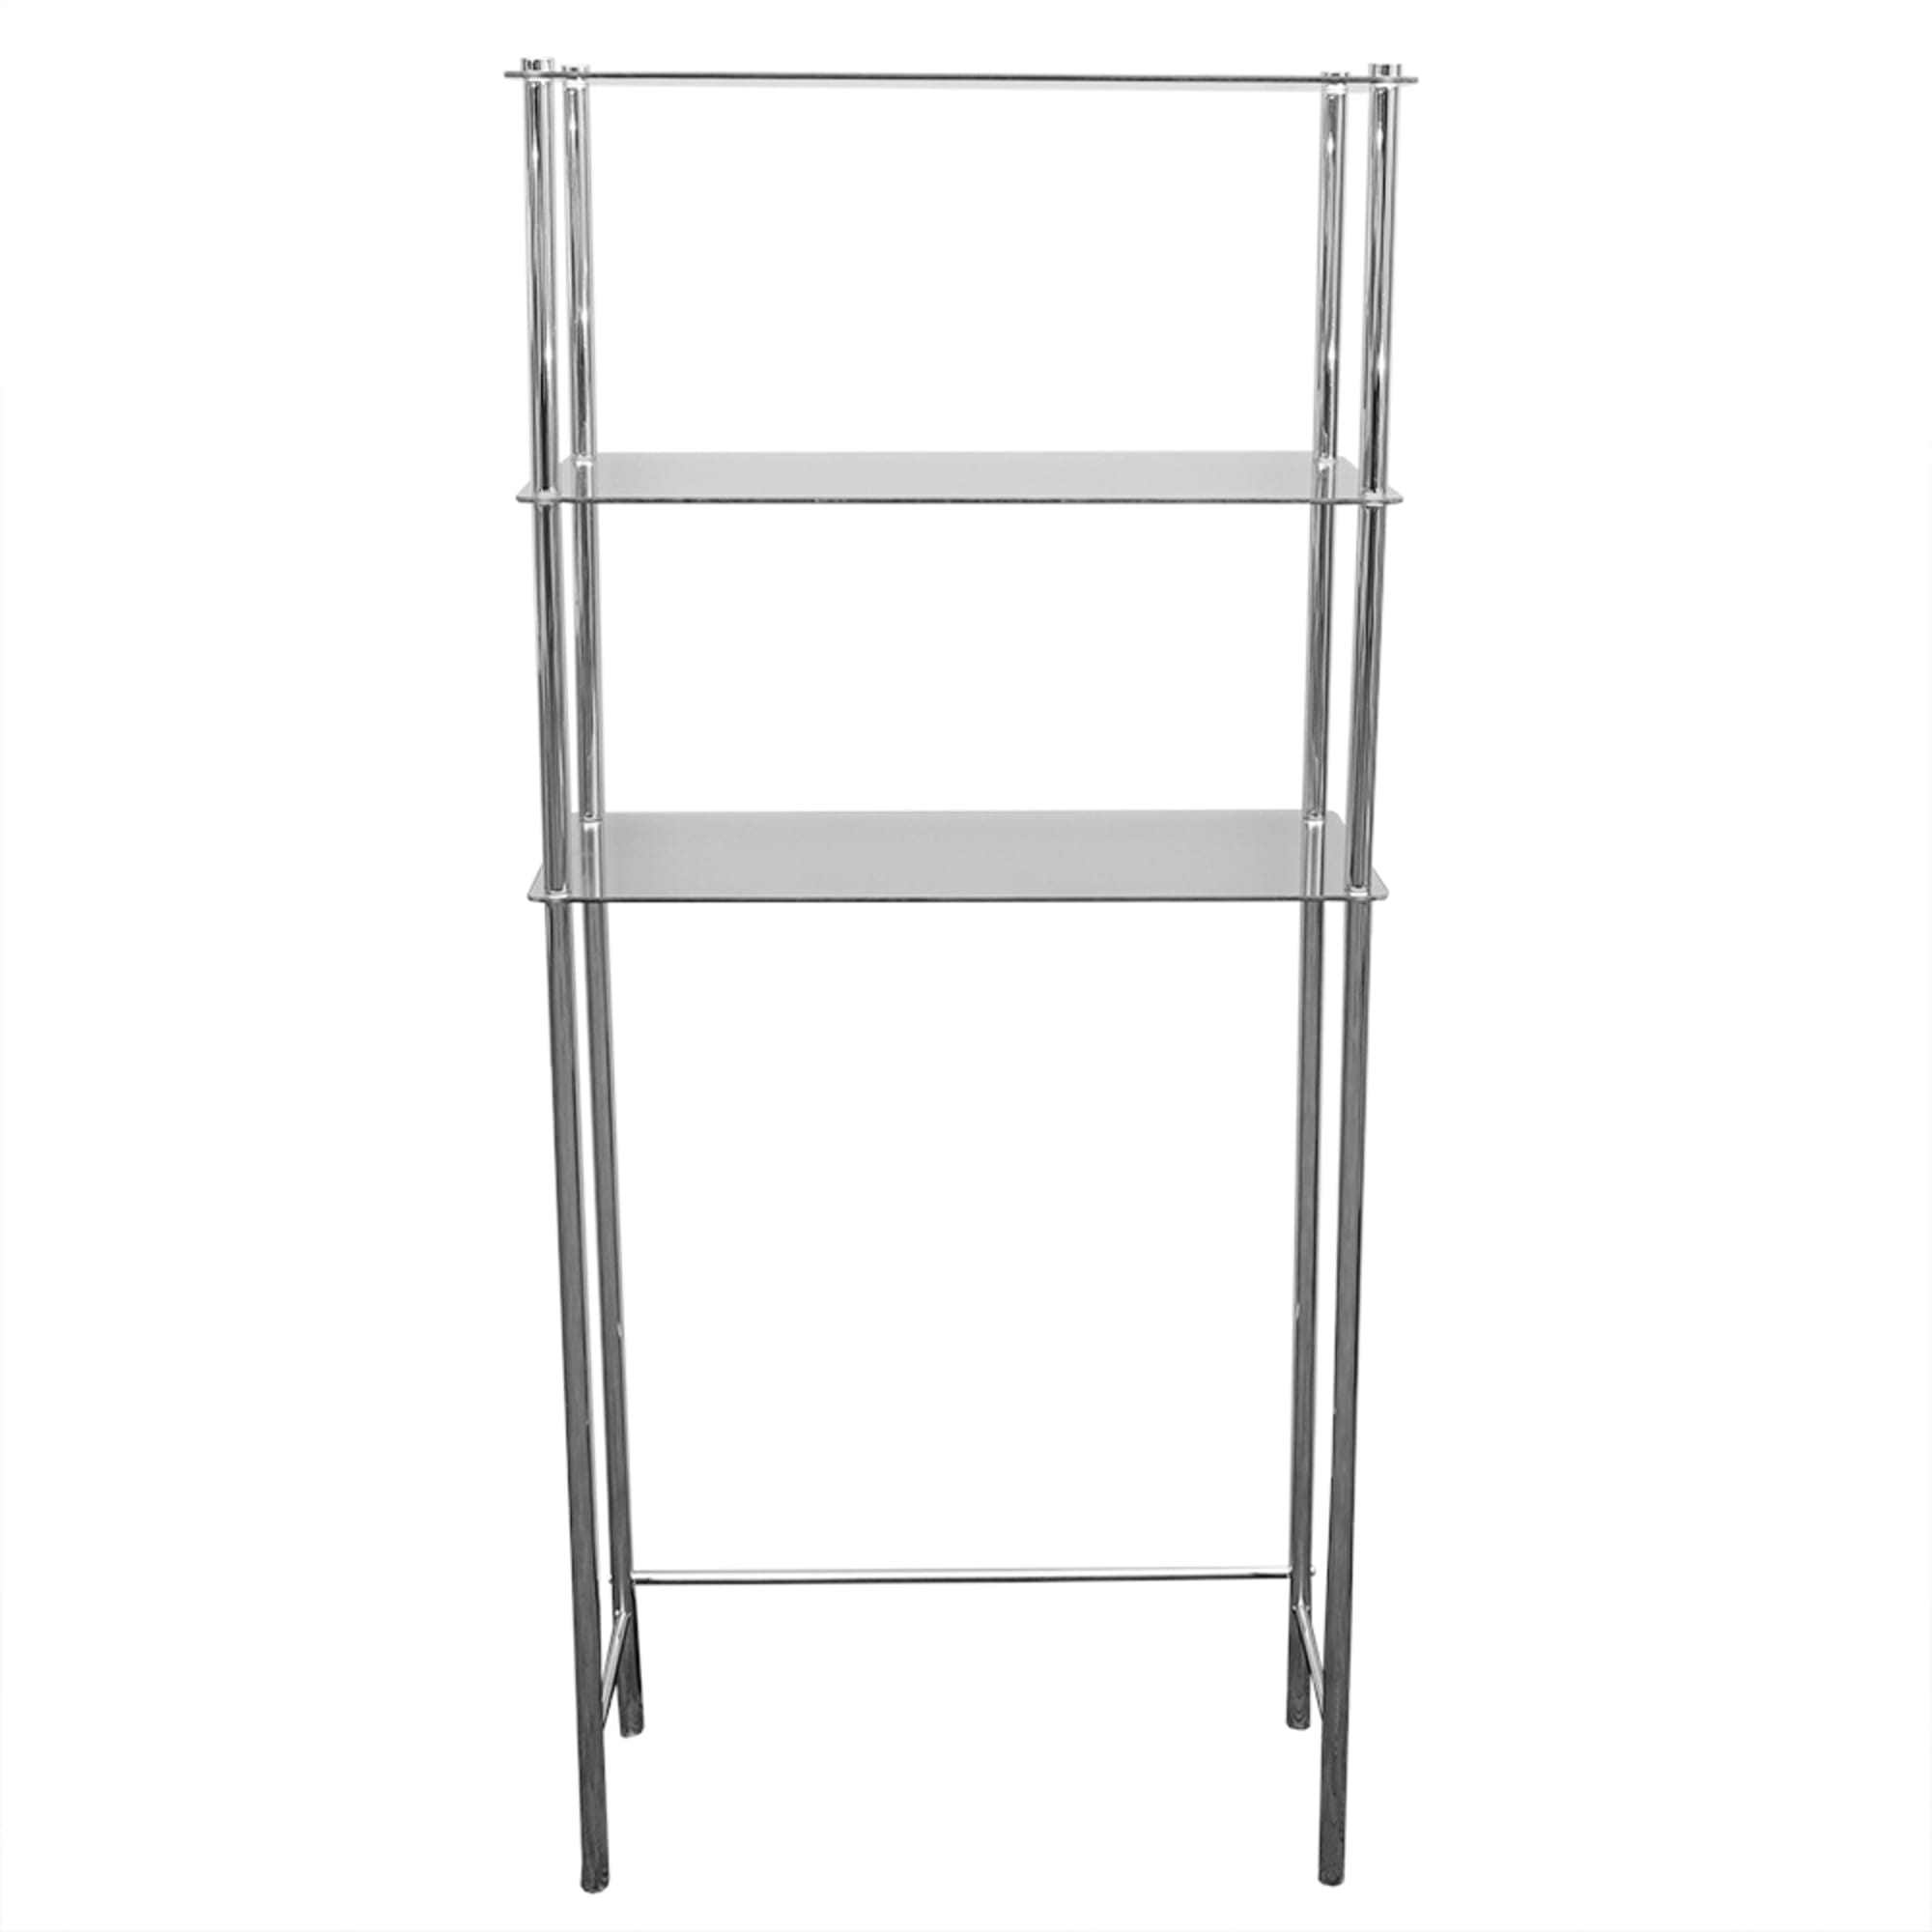 Home Basics 3 Tier  Over the Toilet Space Saver with Tempered Glass Shelves, Chrome $70.00 EACH, CASE PACK OF 4